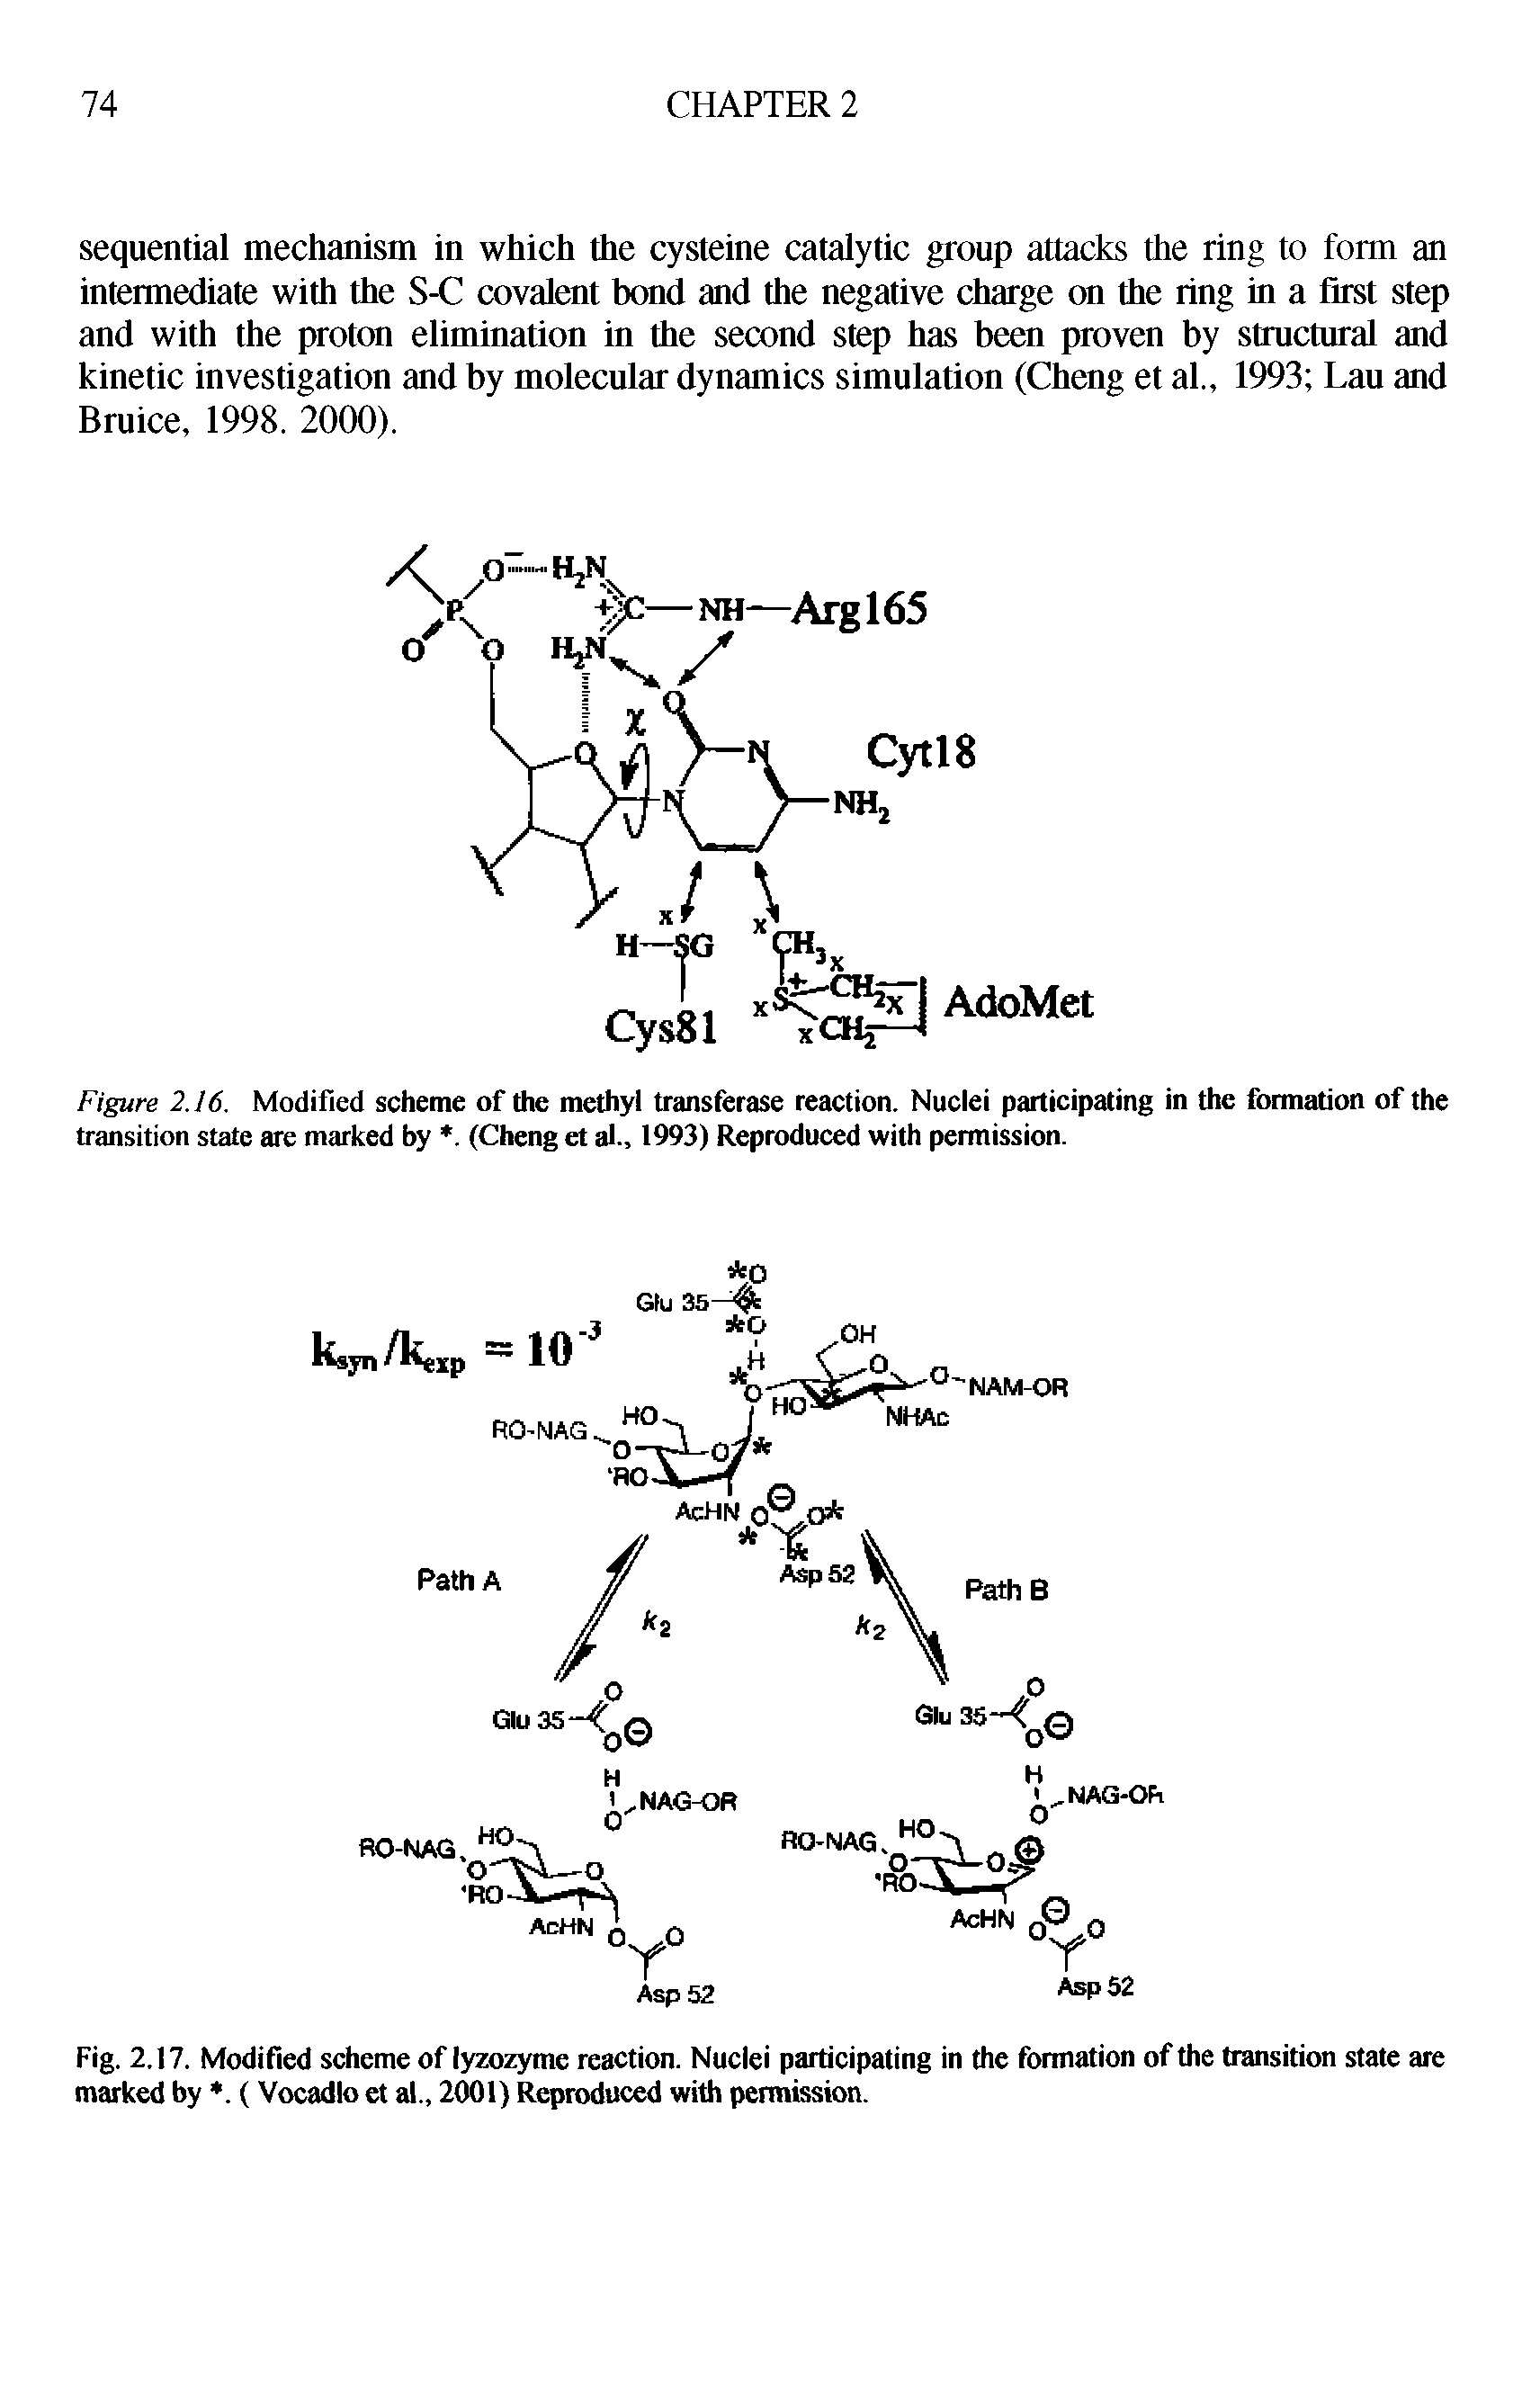 Fig. 2.17. Modified scheme of lyzozyme reaction. Nuclei participating in the formation of the transition state are marked by. (Vocadlo et al., 2001) Reproduced with permission.